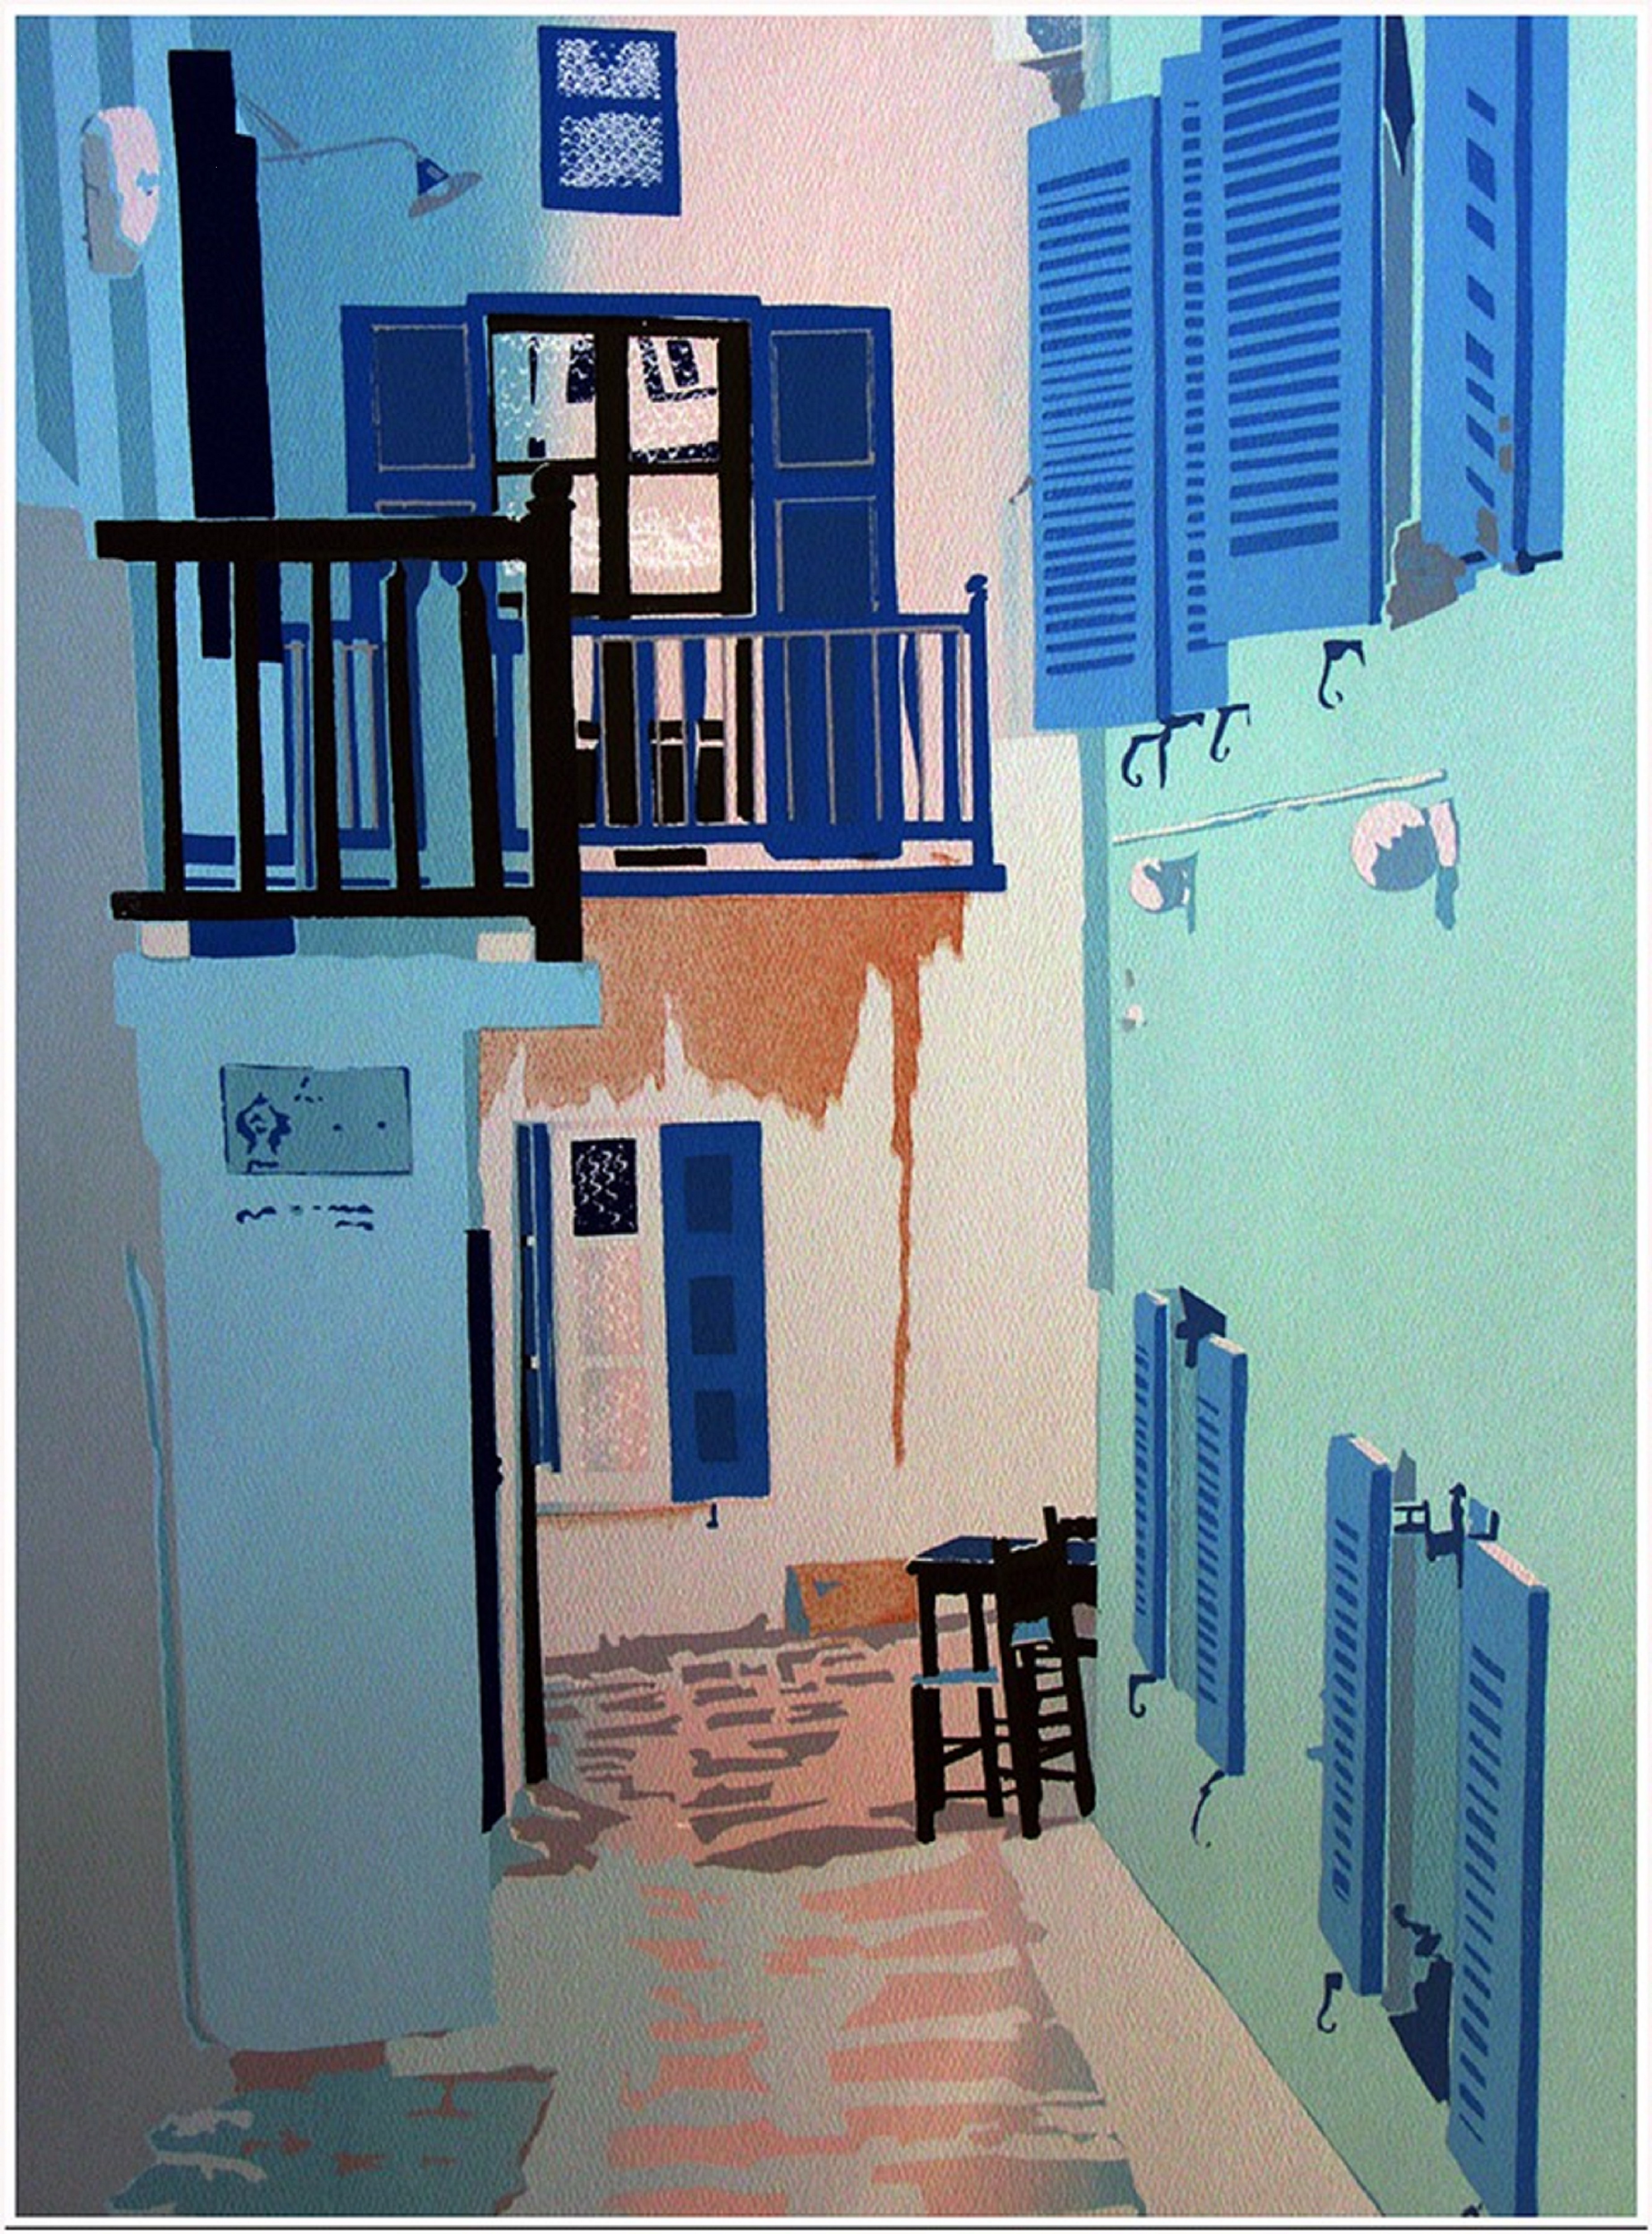 "Shutters and Lace" by J. Neil Bittner